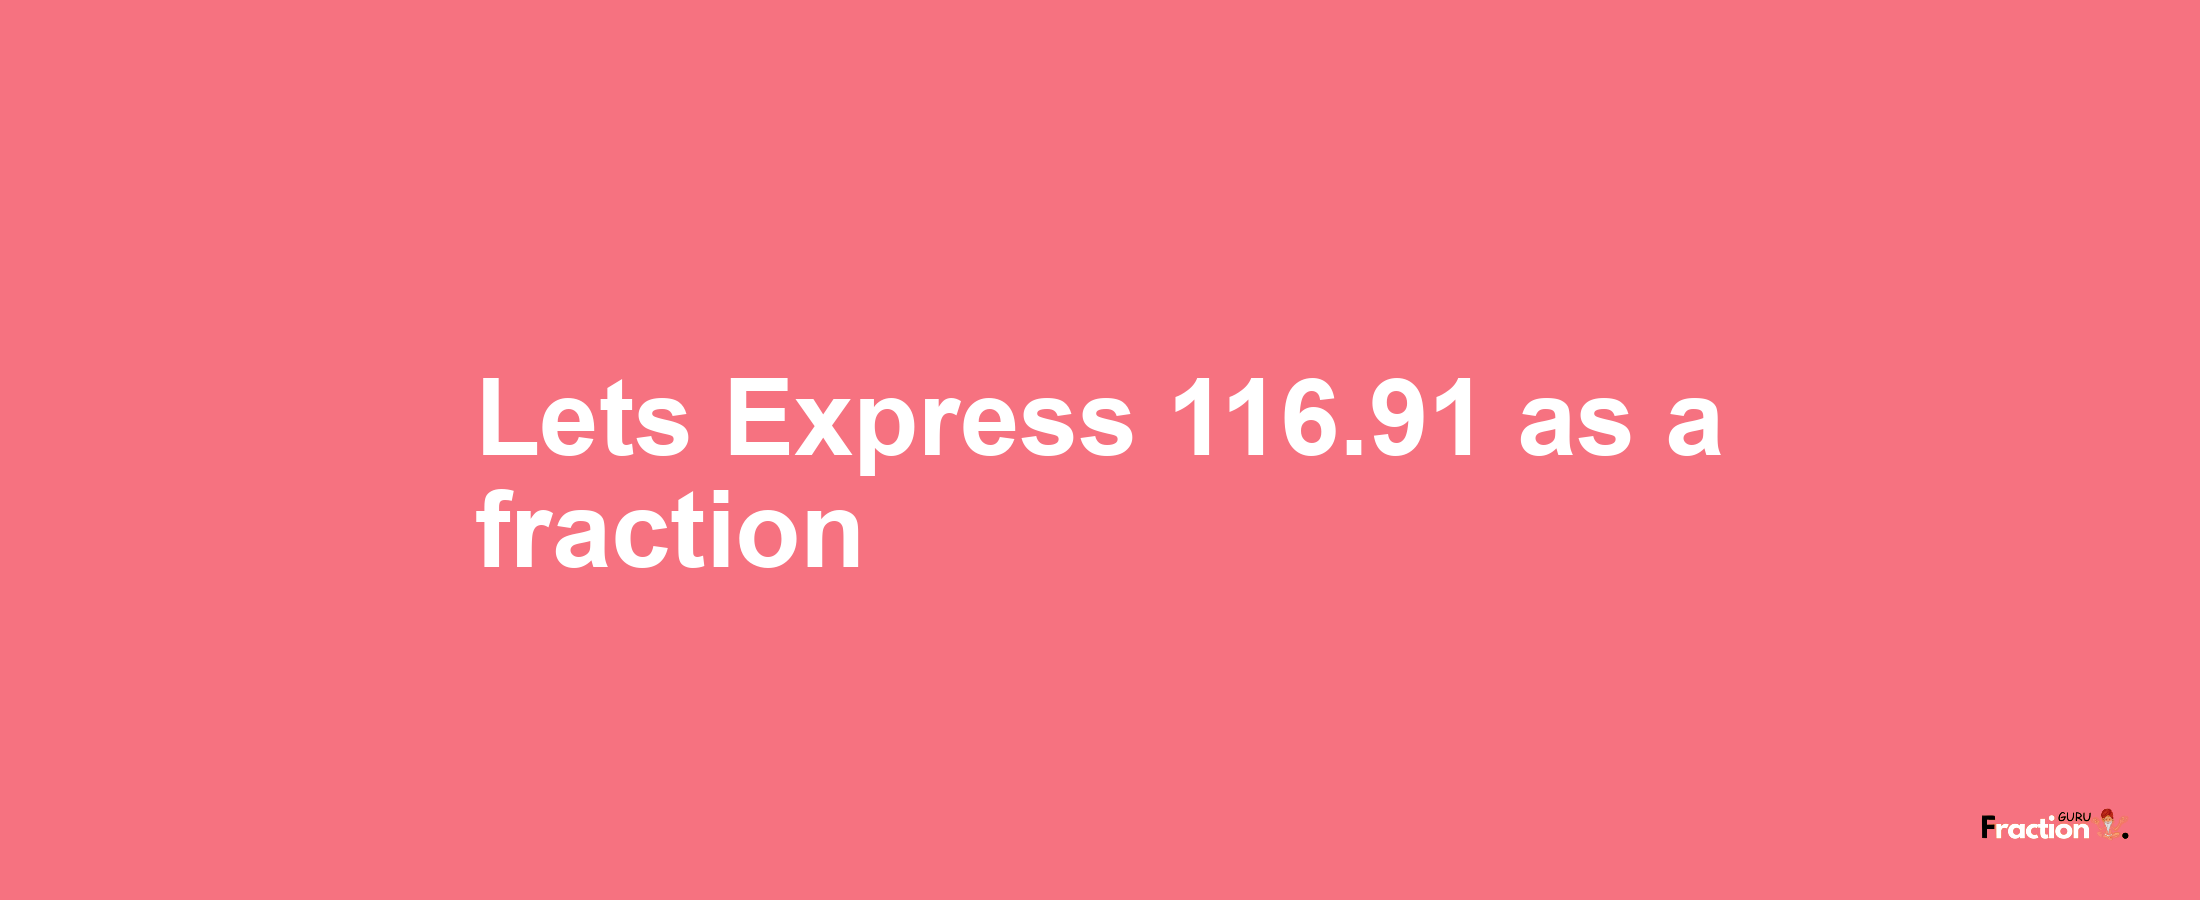 Lets Express 116.91 as afraction